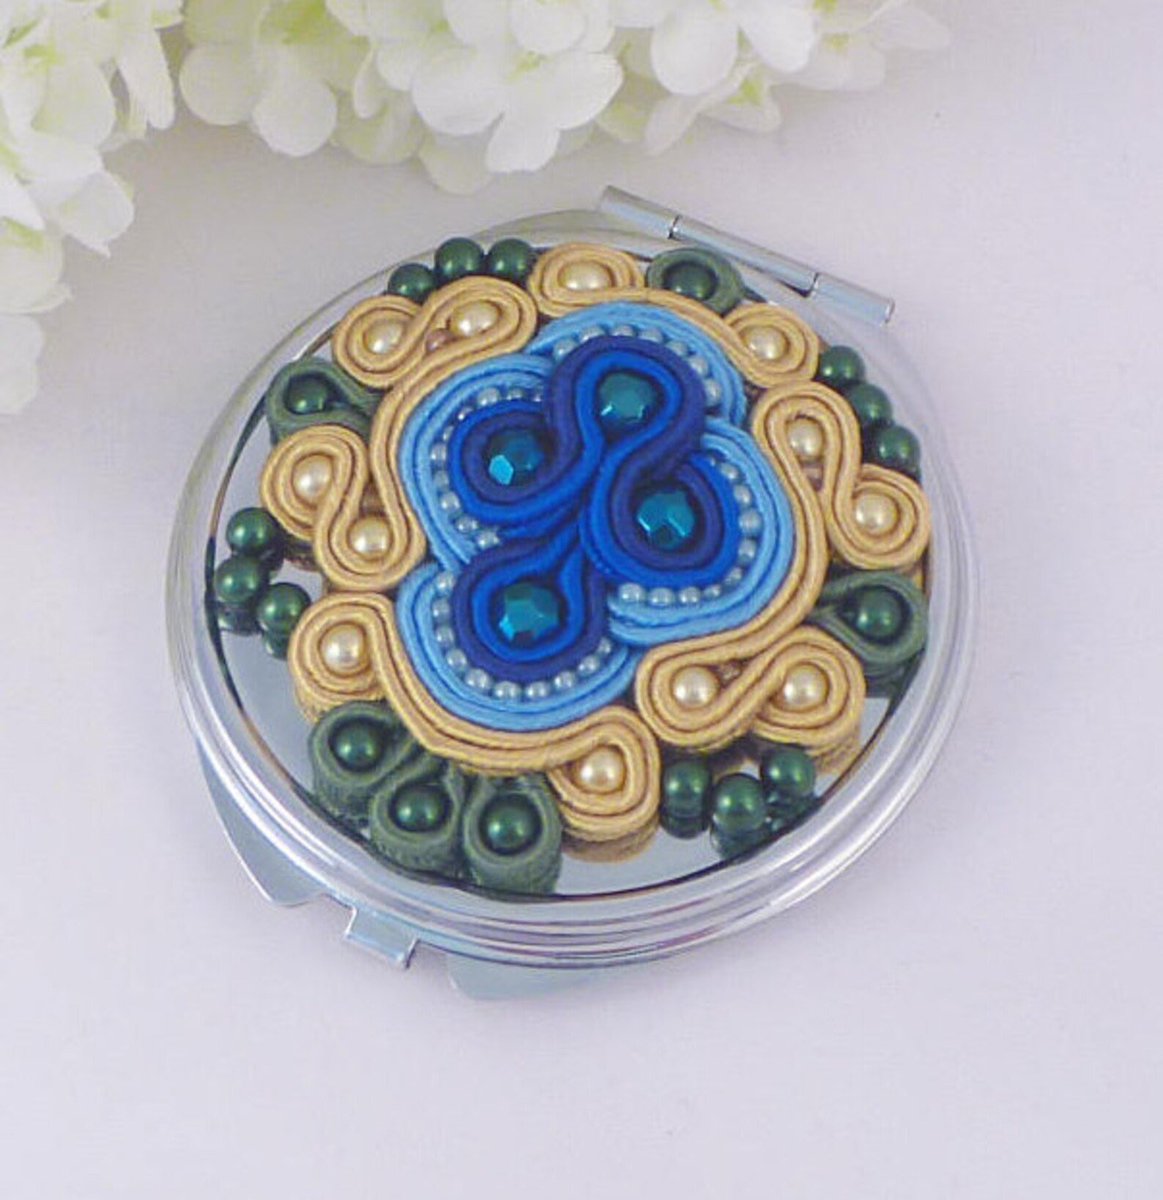 Beautiful accessories 

Unique compact mirrors make beautiful gifts

#giftideas #mirrors #MHHSBD